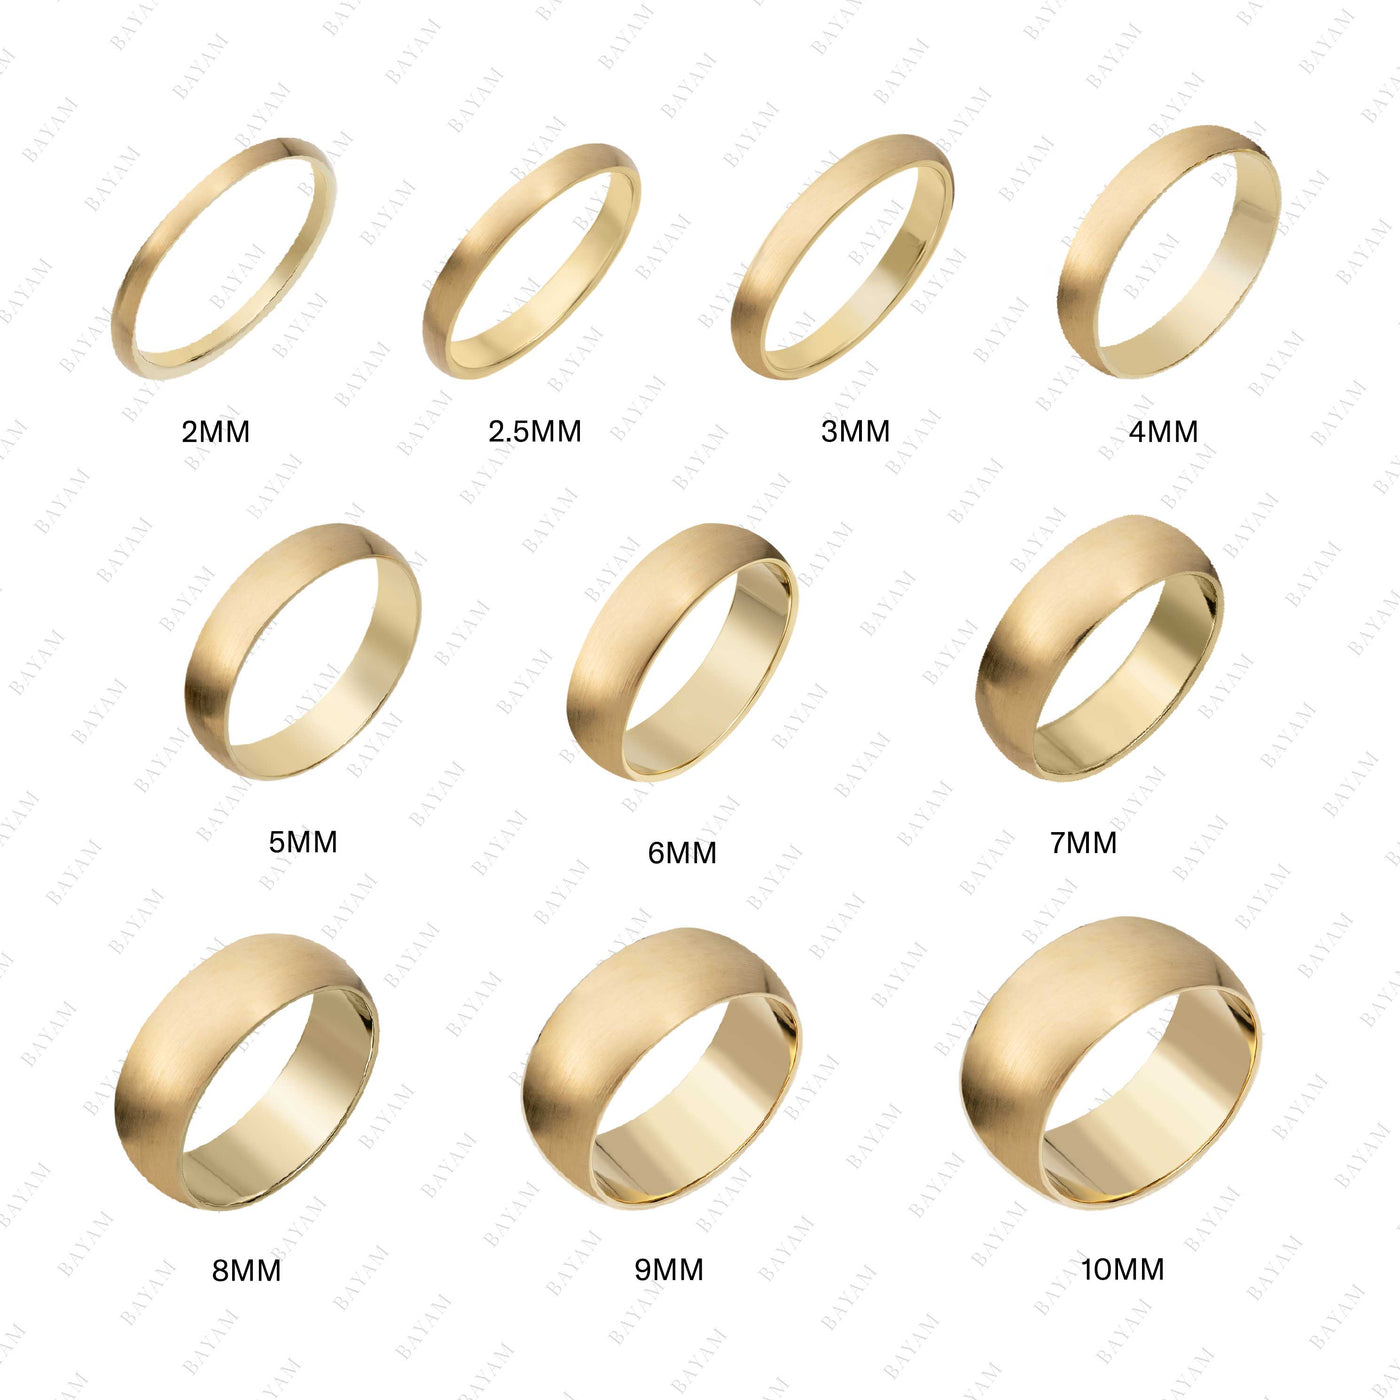 Classic Wedding Band Gold - Solid